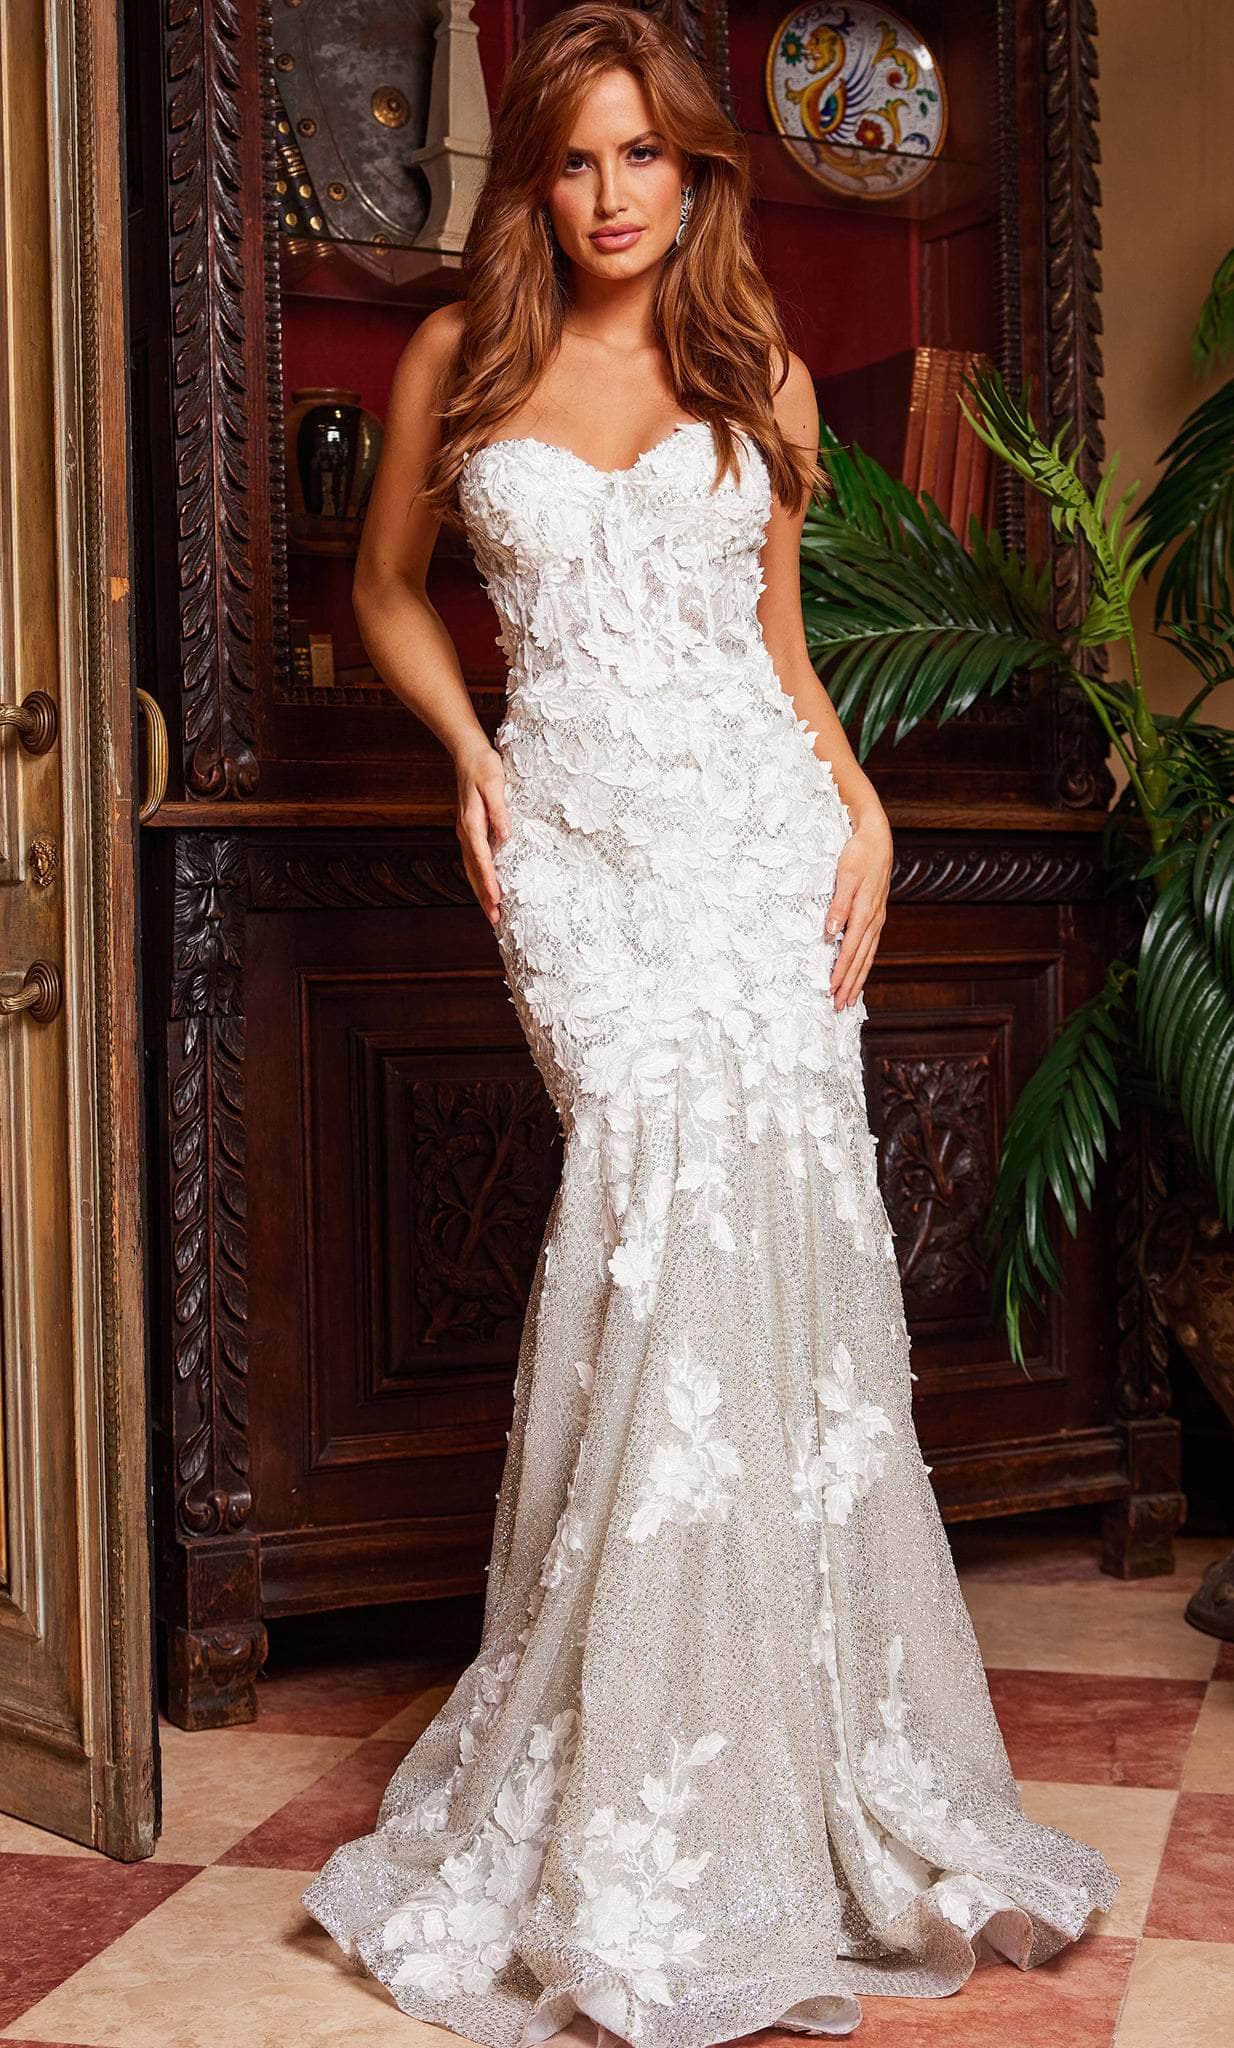 Image of Jovani 07496 - Lace Appliqued Sweetheart Evening Gown